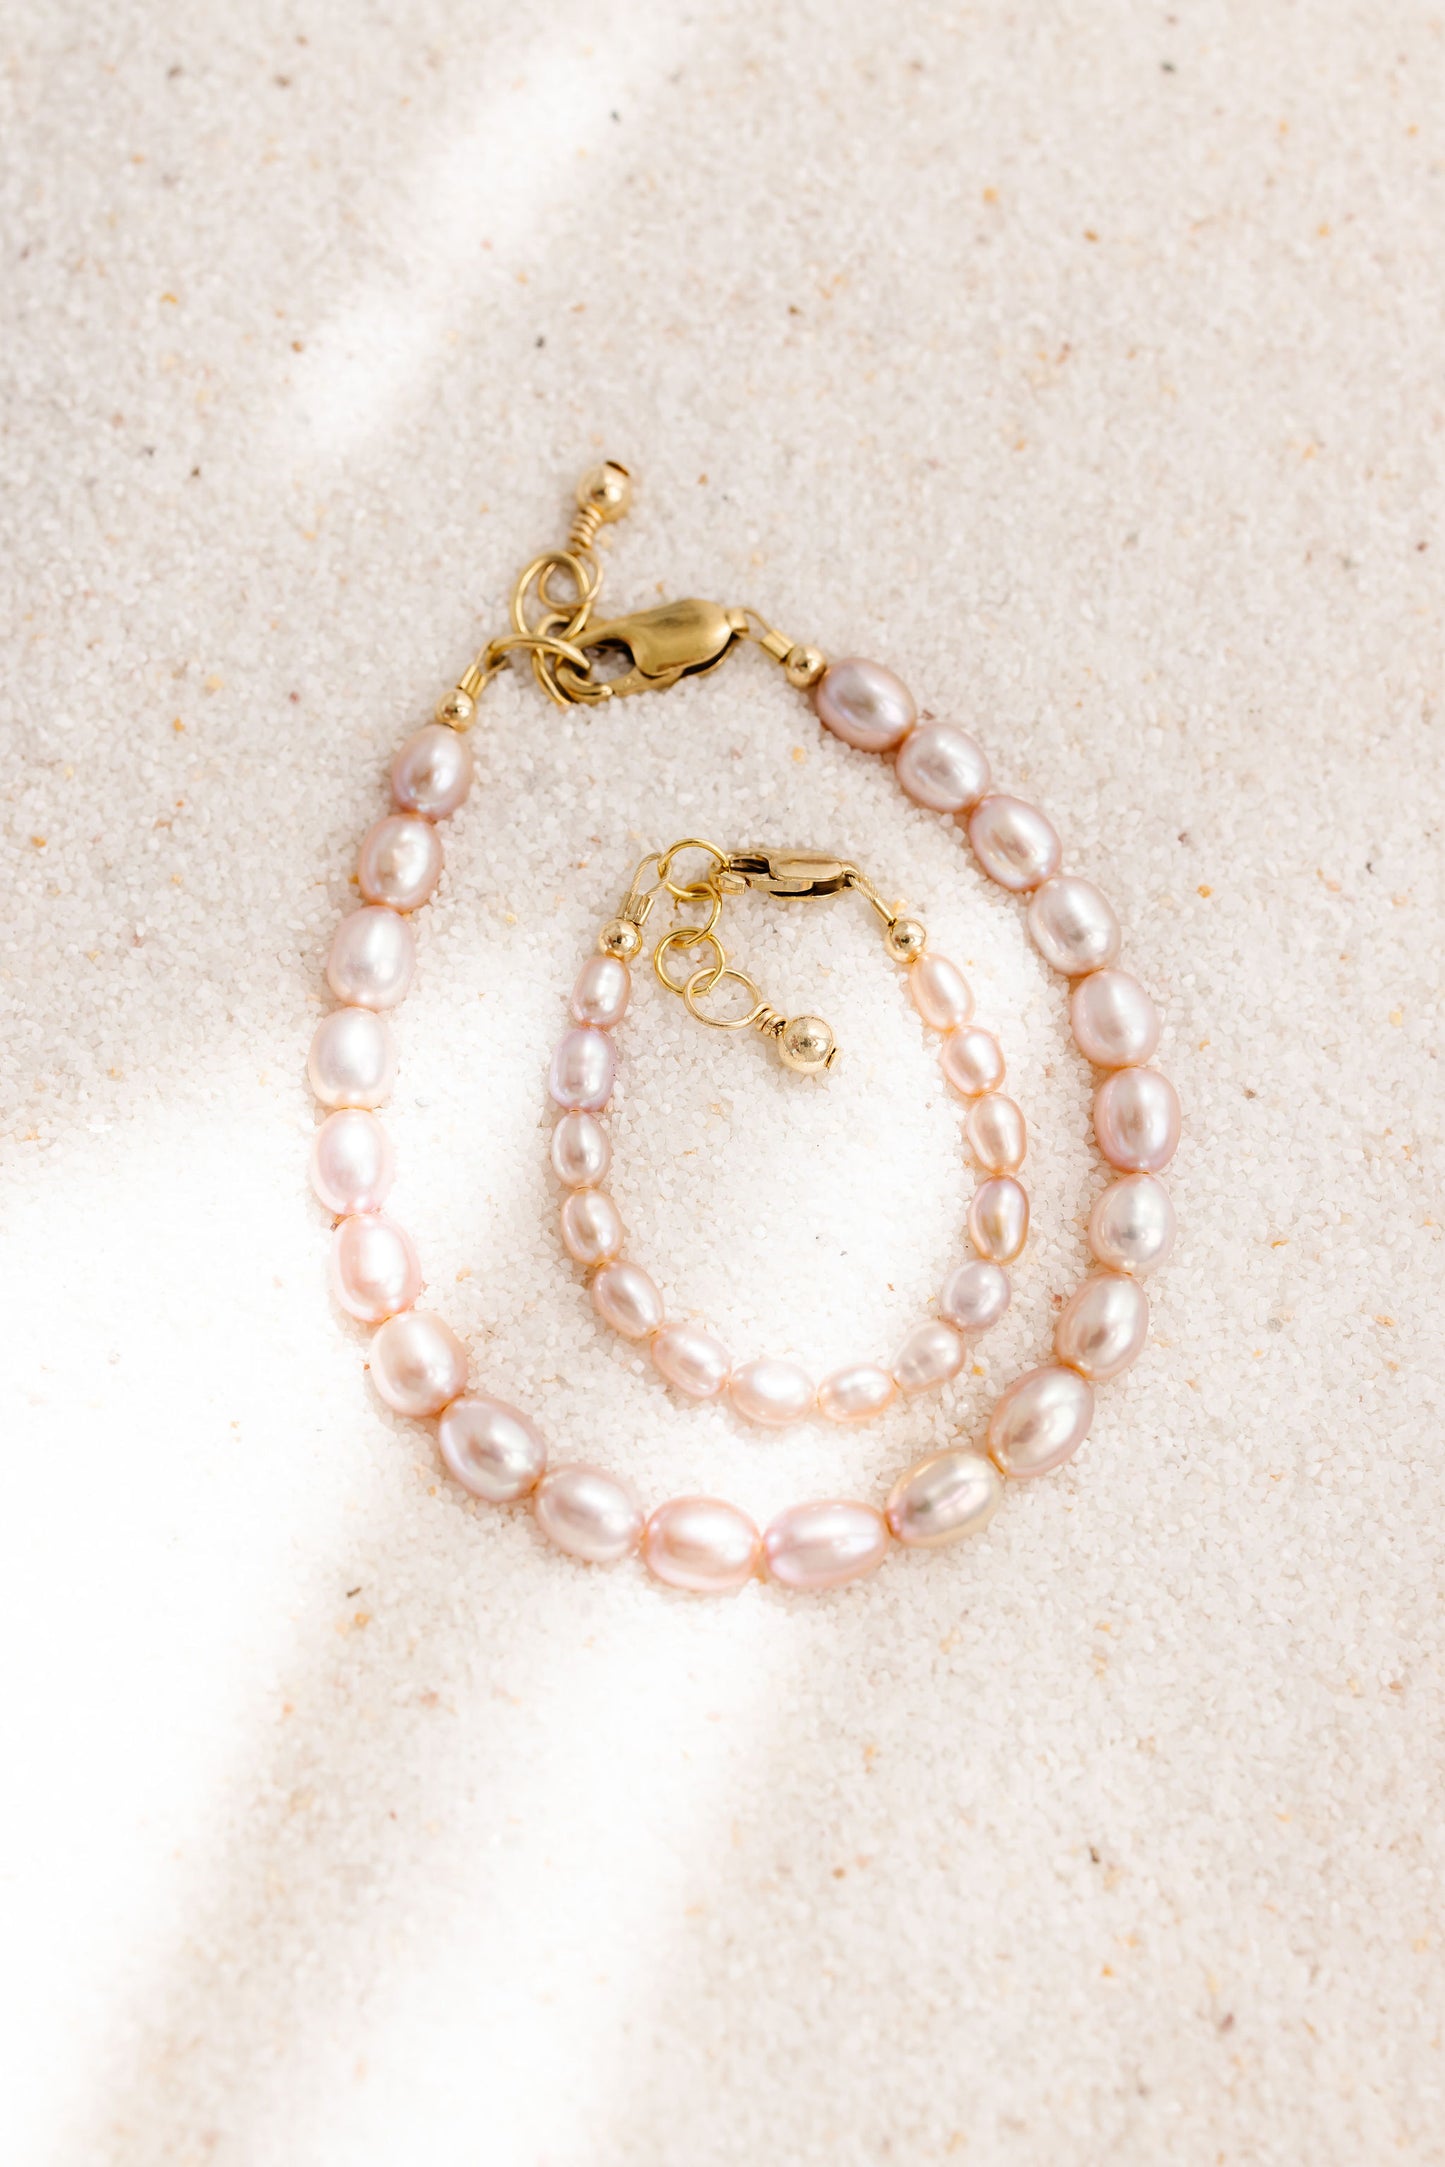 Load image into Gallery viewer, Blush Pearl Mom + Mini Bracelet Set (6MM + 8MM Beads)
